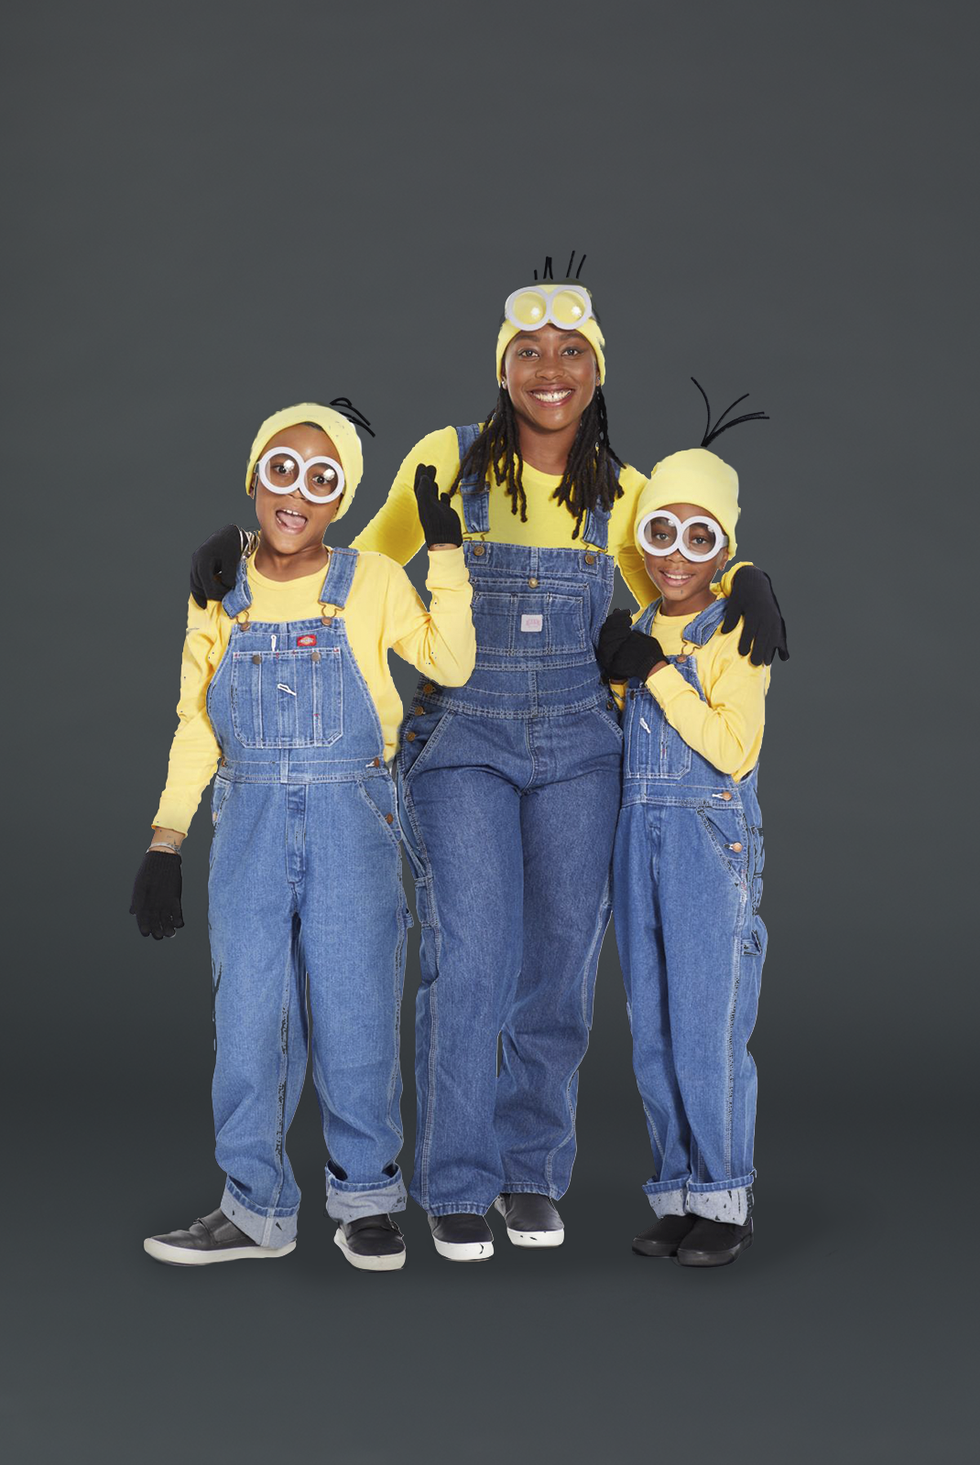 32 Best Sibling Halloween Costumes for Brothers & Sisters